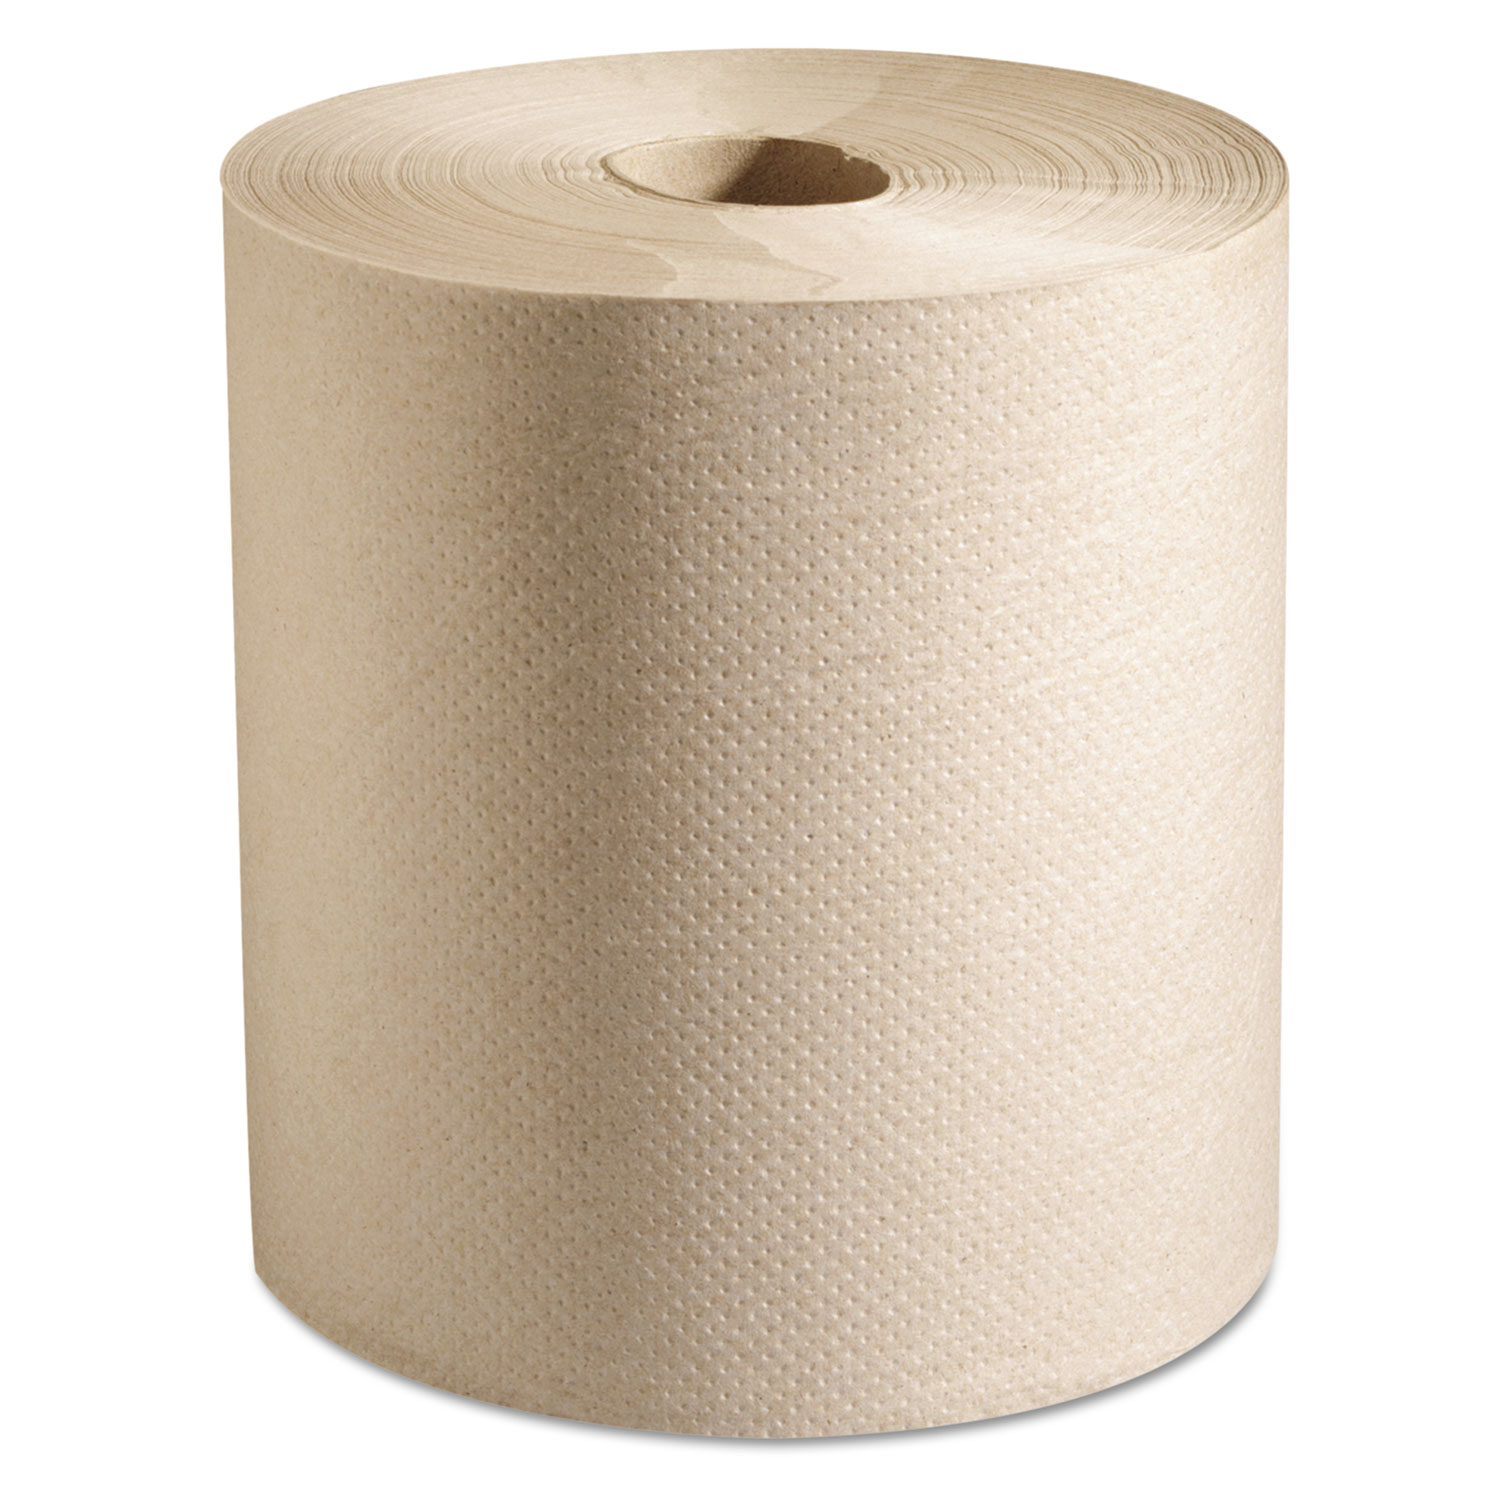  Marcal PRO P728N 100% Recycled Hardwound Roll Paper Towels, 7 7/8 x 800 ft, Natural, 6 Rolls/Ct (MRCP728N) 